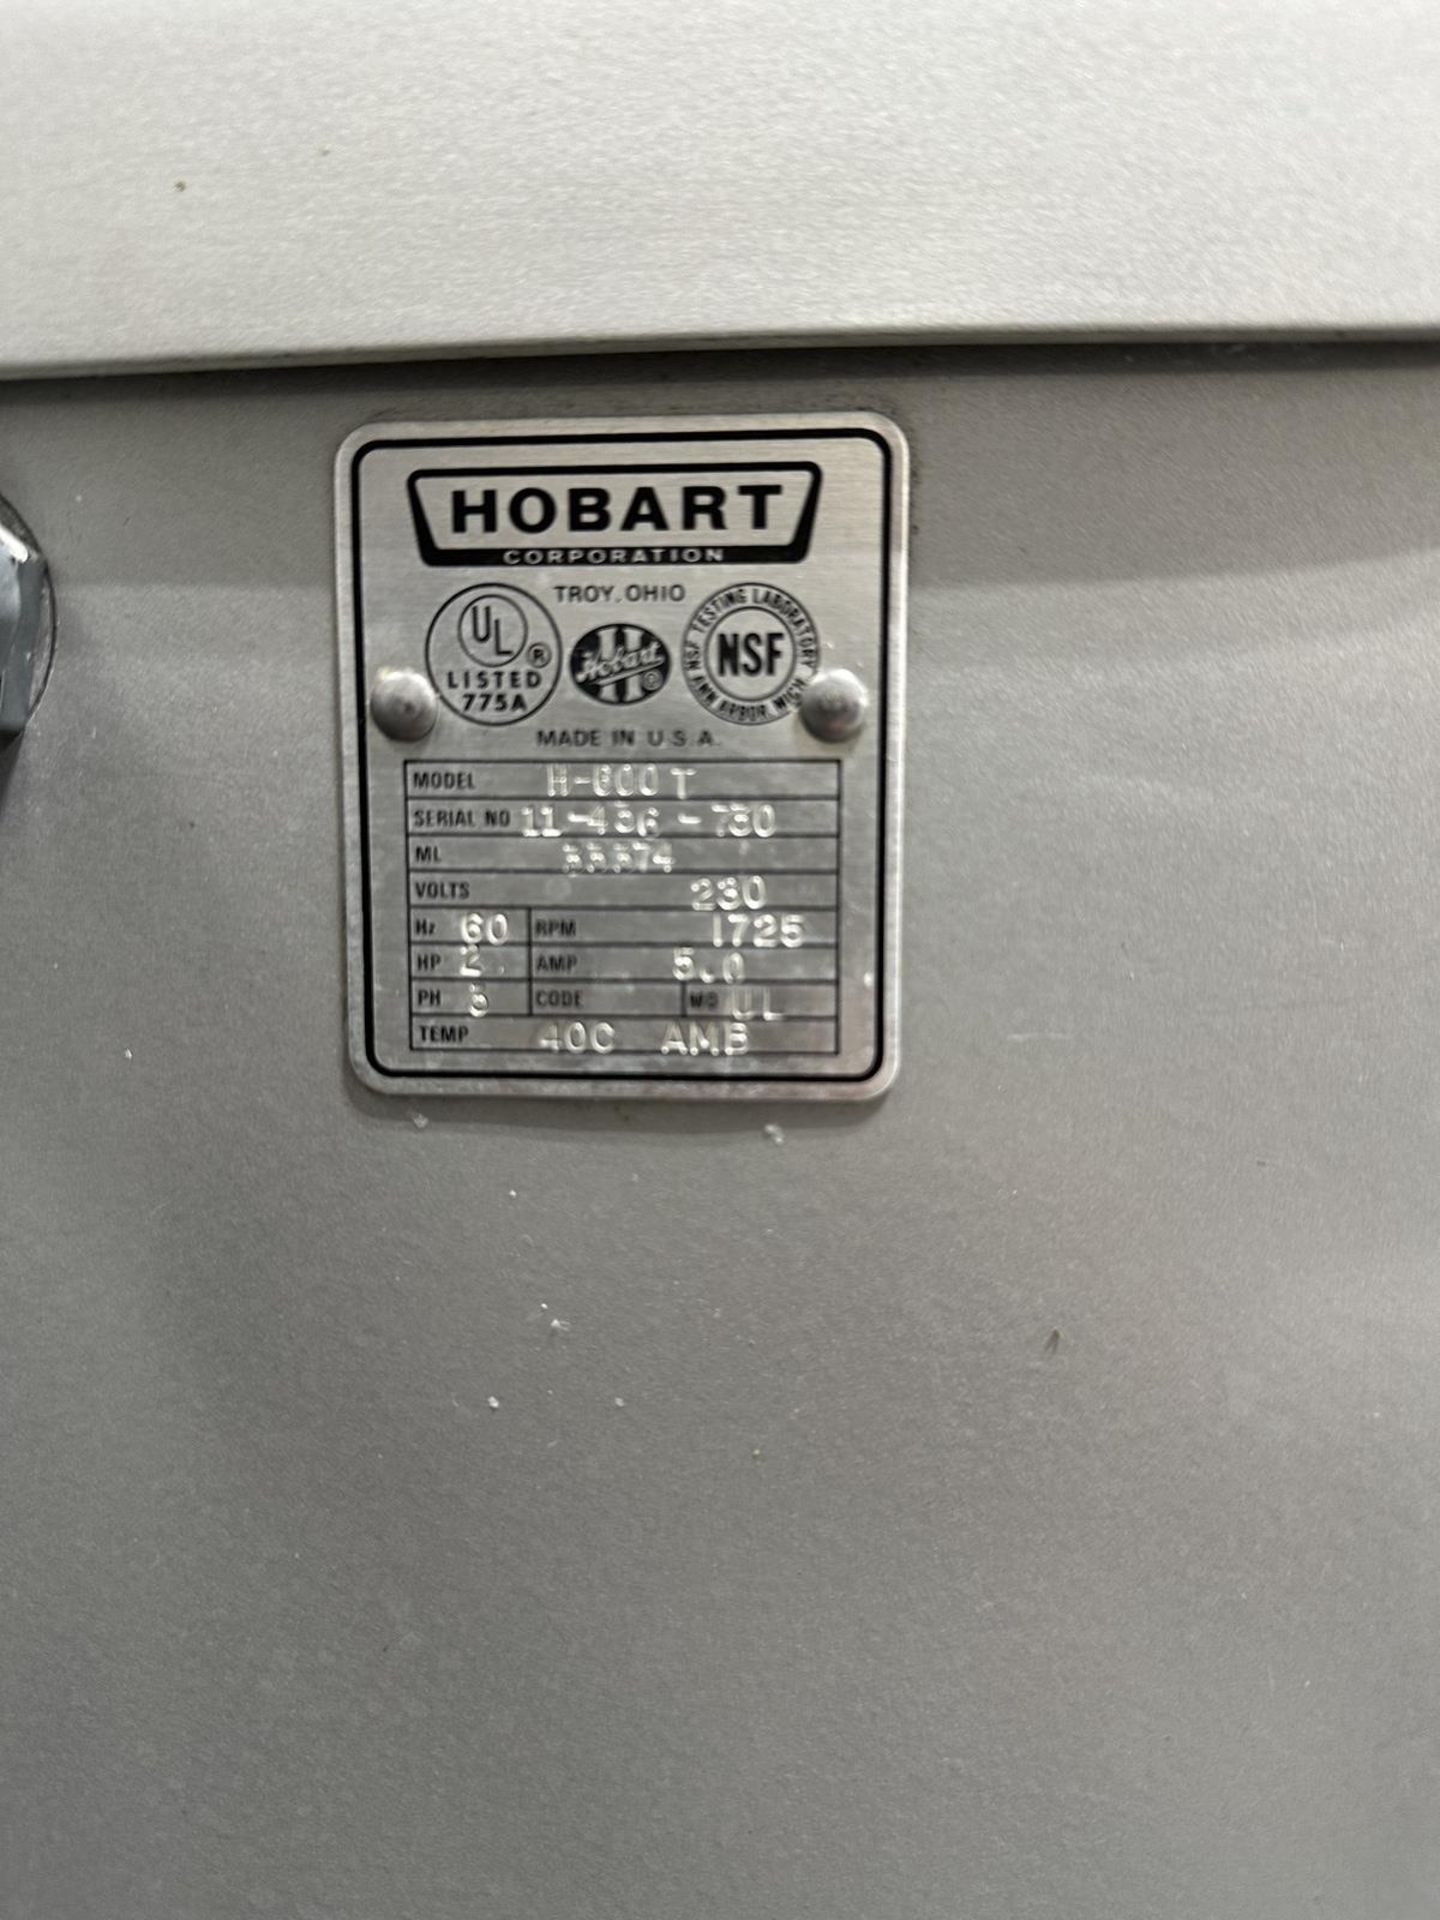 Hobart H-600T 60 Quart Commercial Mixer s/n 11-436-730 with Attachments | Rig Fee $250 - Image 4 of 6